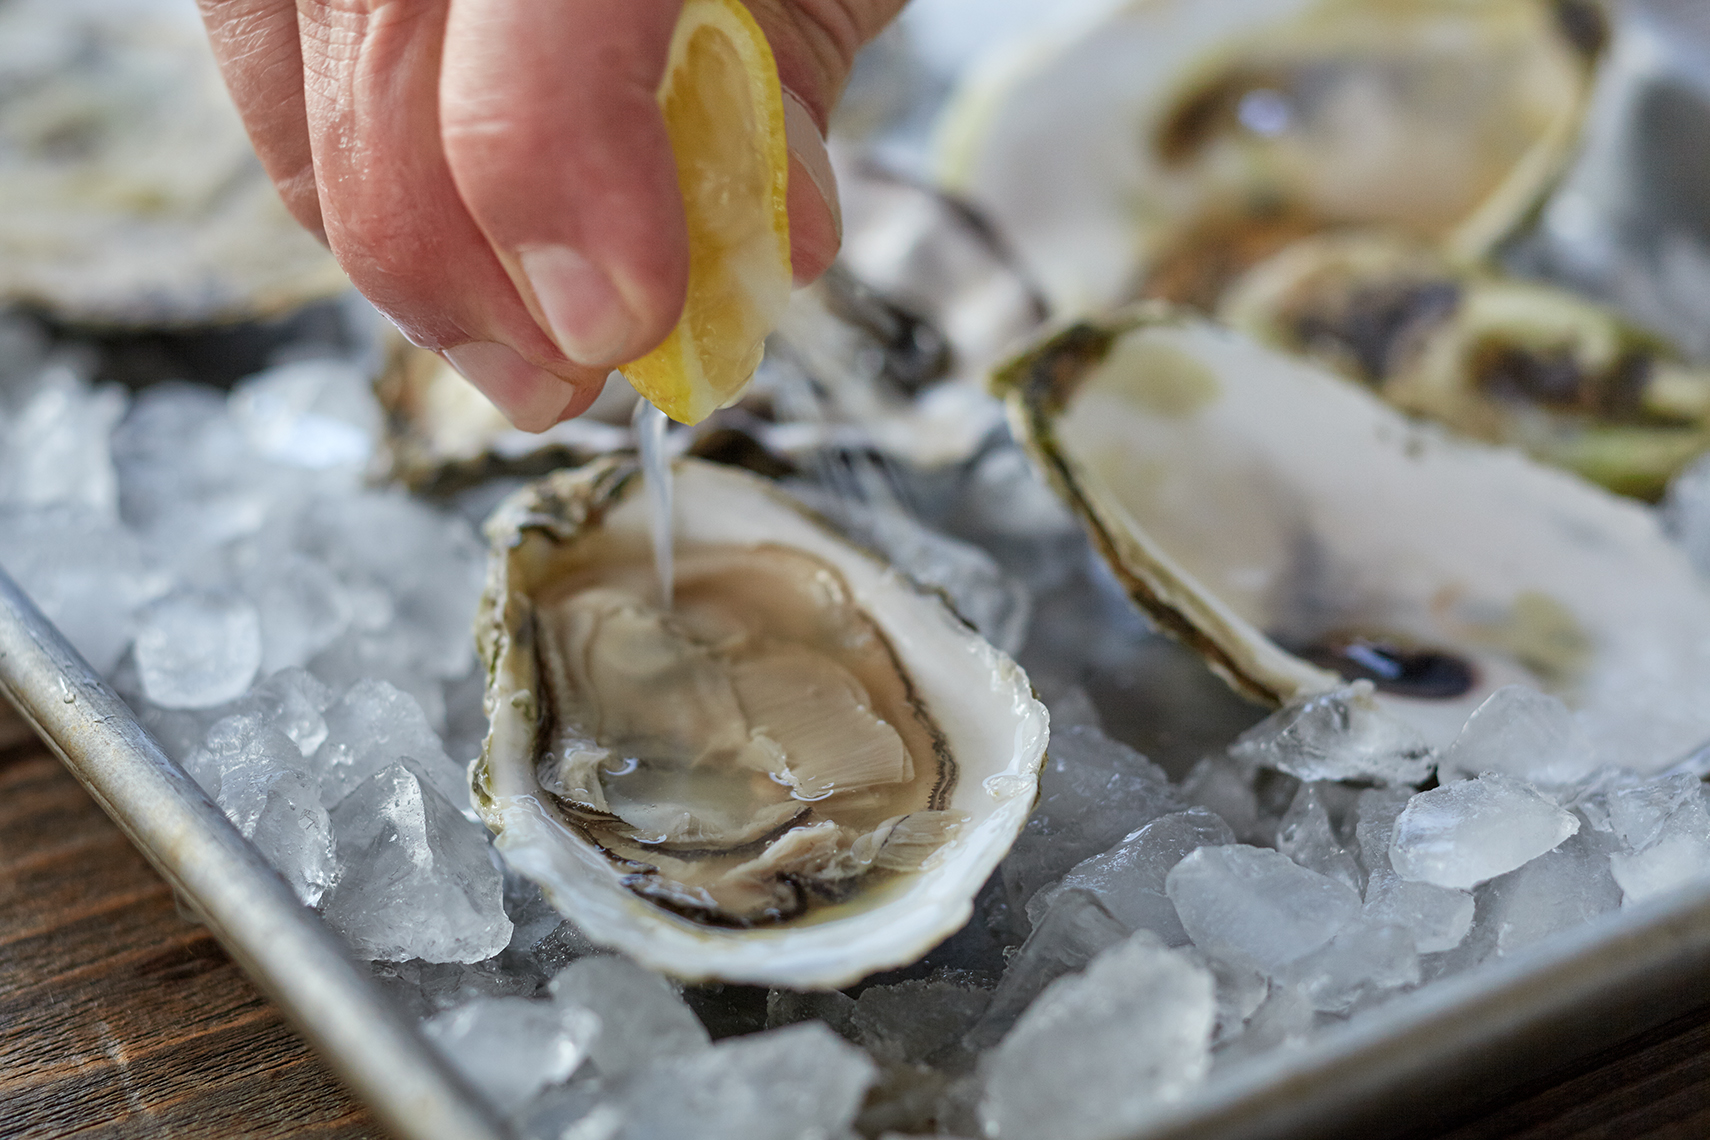 Squeezing lemon on a plate of oysters